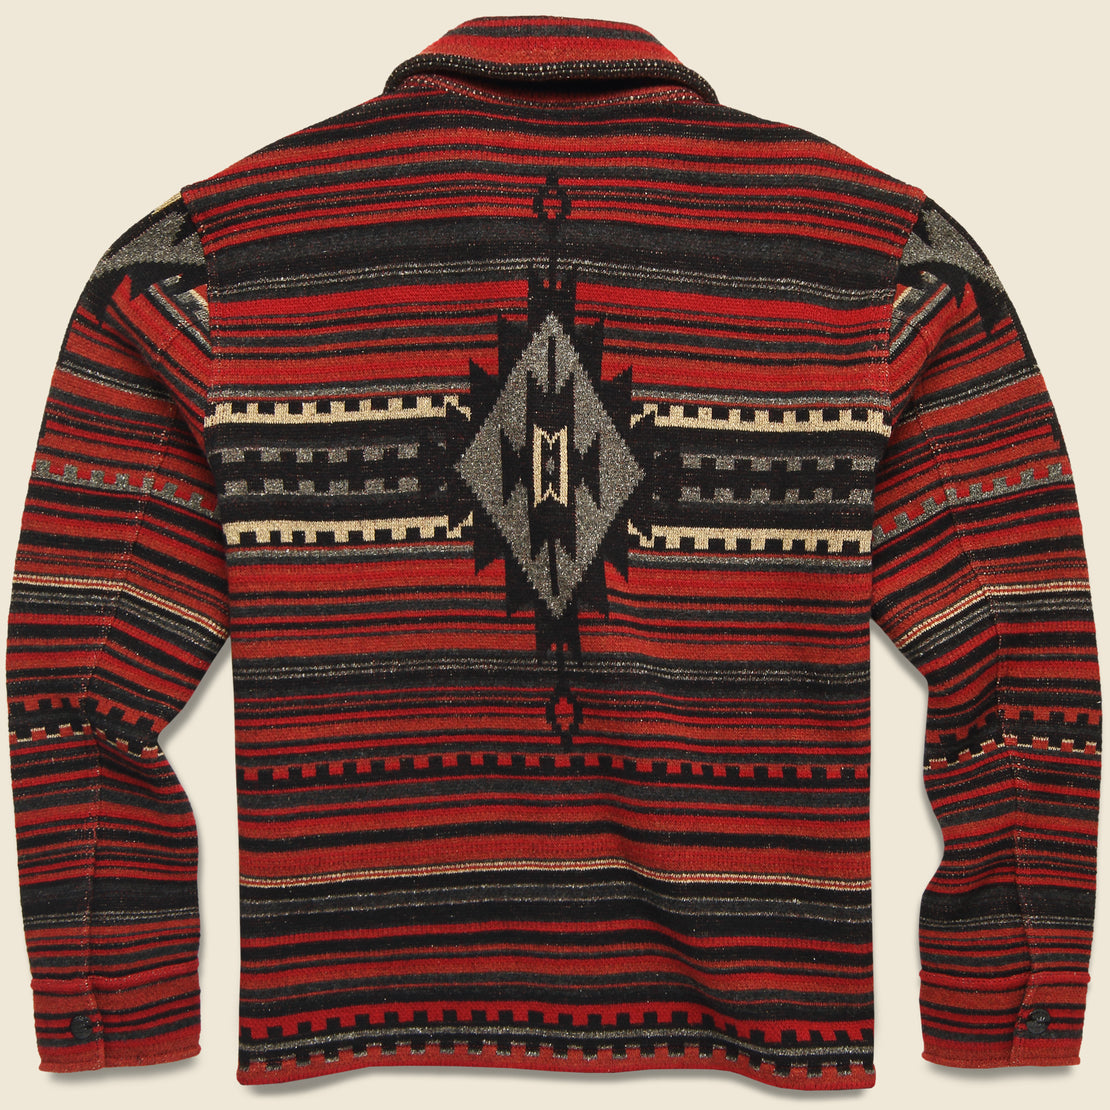 Wool-Blend Jacquard Workshirt Sweater - Red/Black - RRL - STAG Provisions - Tops - Sweater